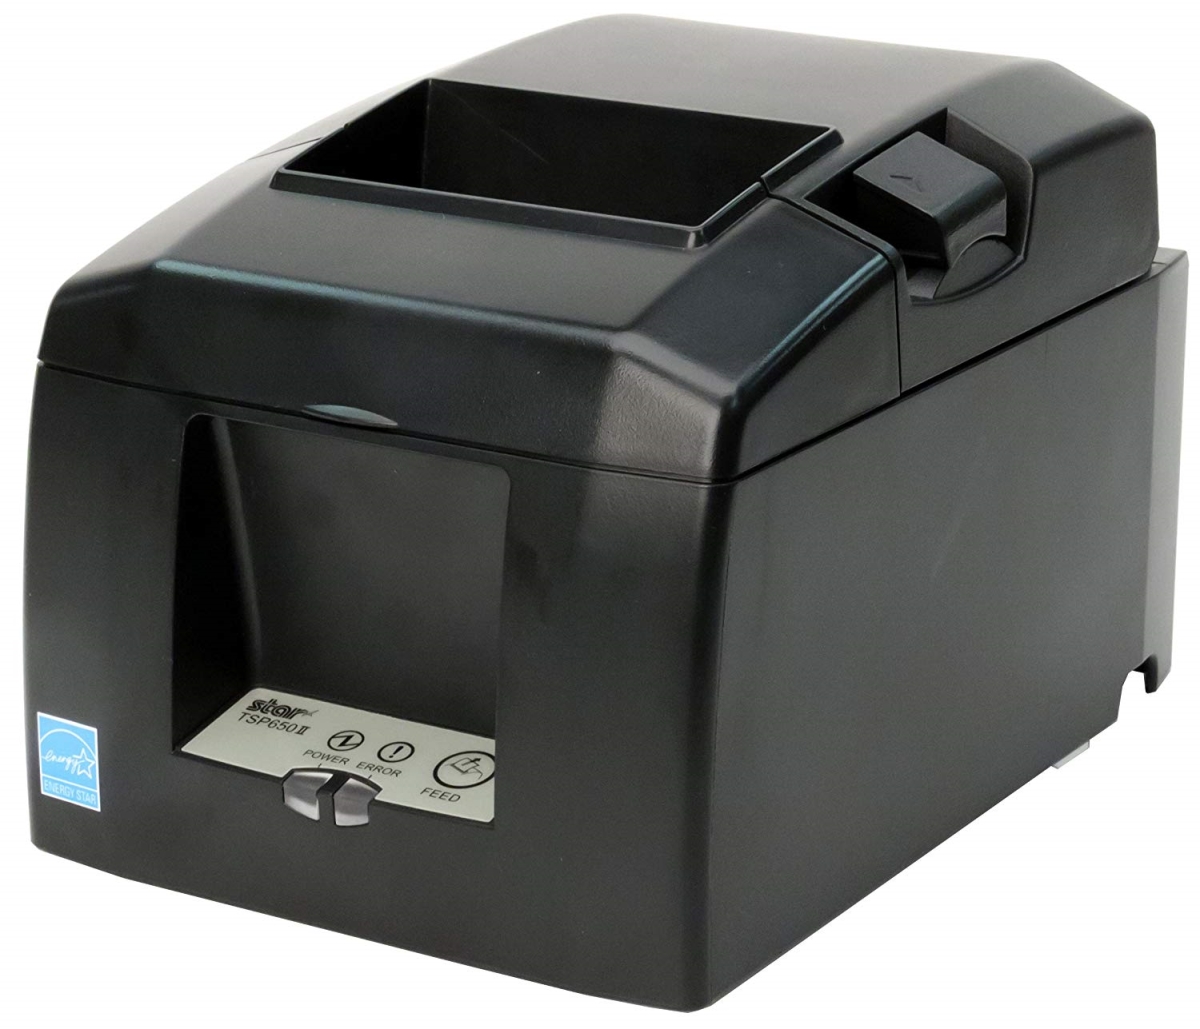 Picture of Star Micronics 37966000 Thermal LAN Cloud Printer - Gray with Auto-Cutter & Power Supply